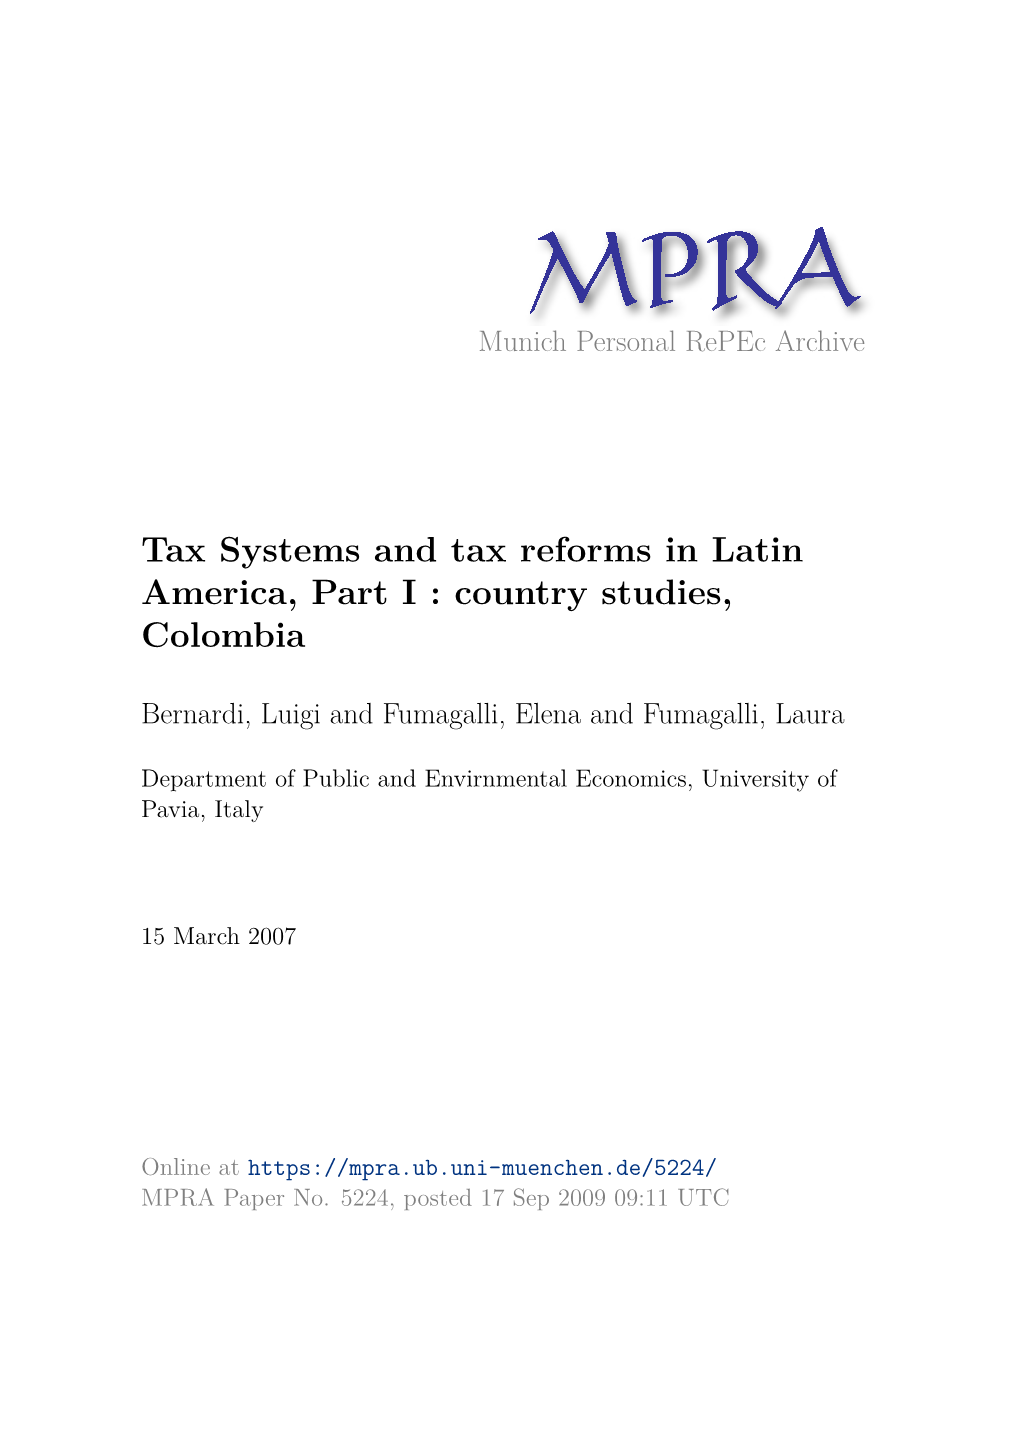 Tax Systems and Tax Reforms in Latin America, Part I : Country Studies, Colombia